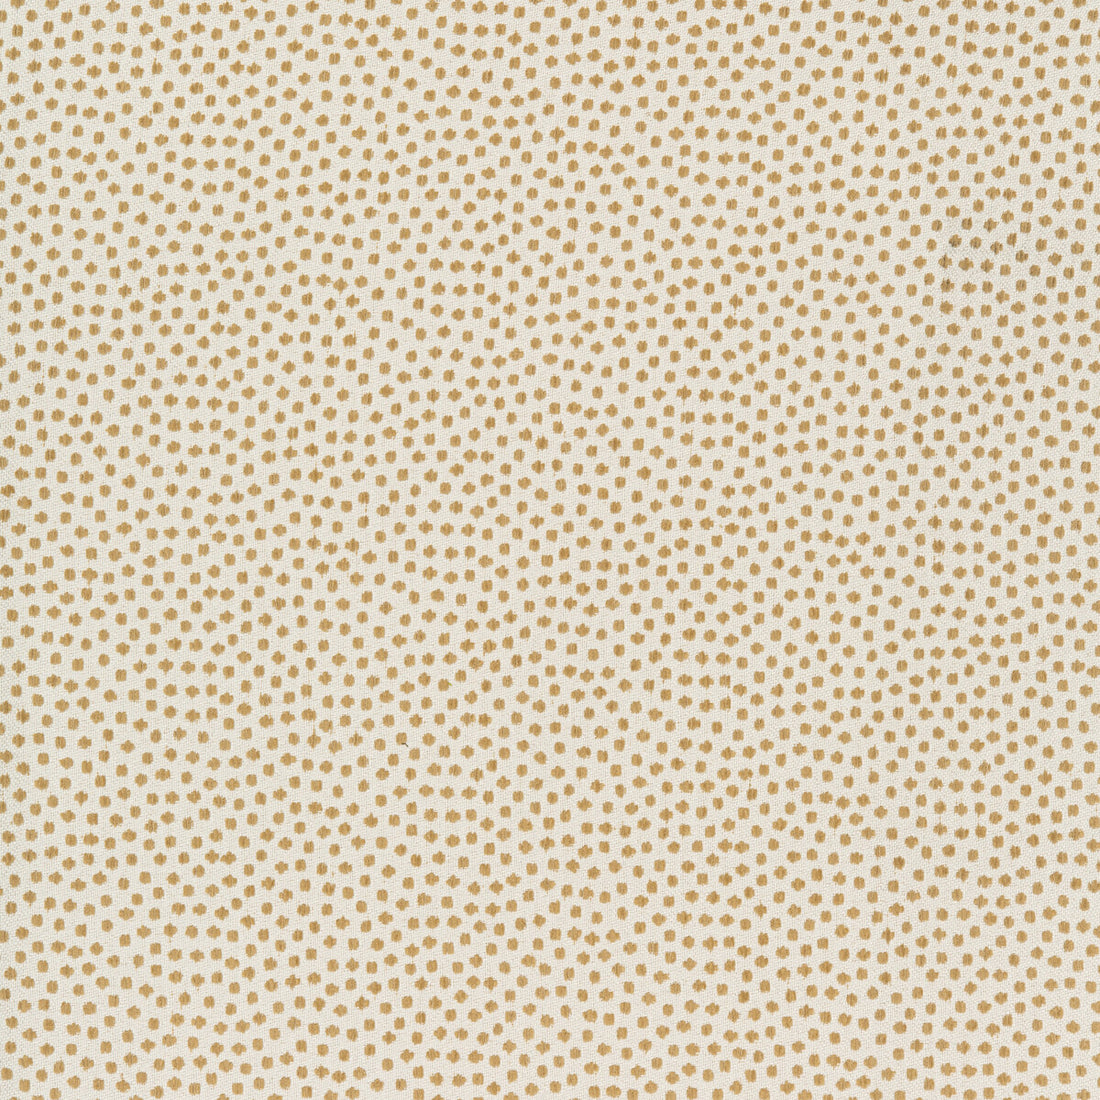 Kravet Design fabric in 36085-1616 color - pattern 36085.1616.0 - by Kravet Design in the Inside Out Performance Fabrics collection